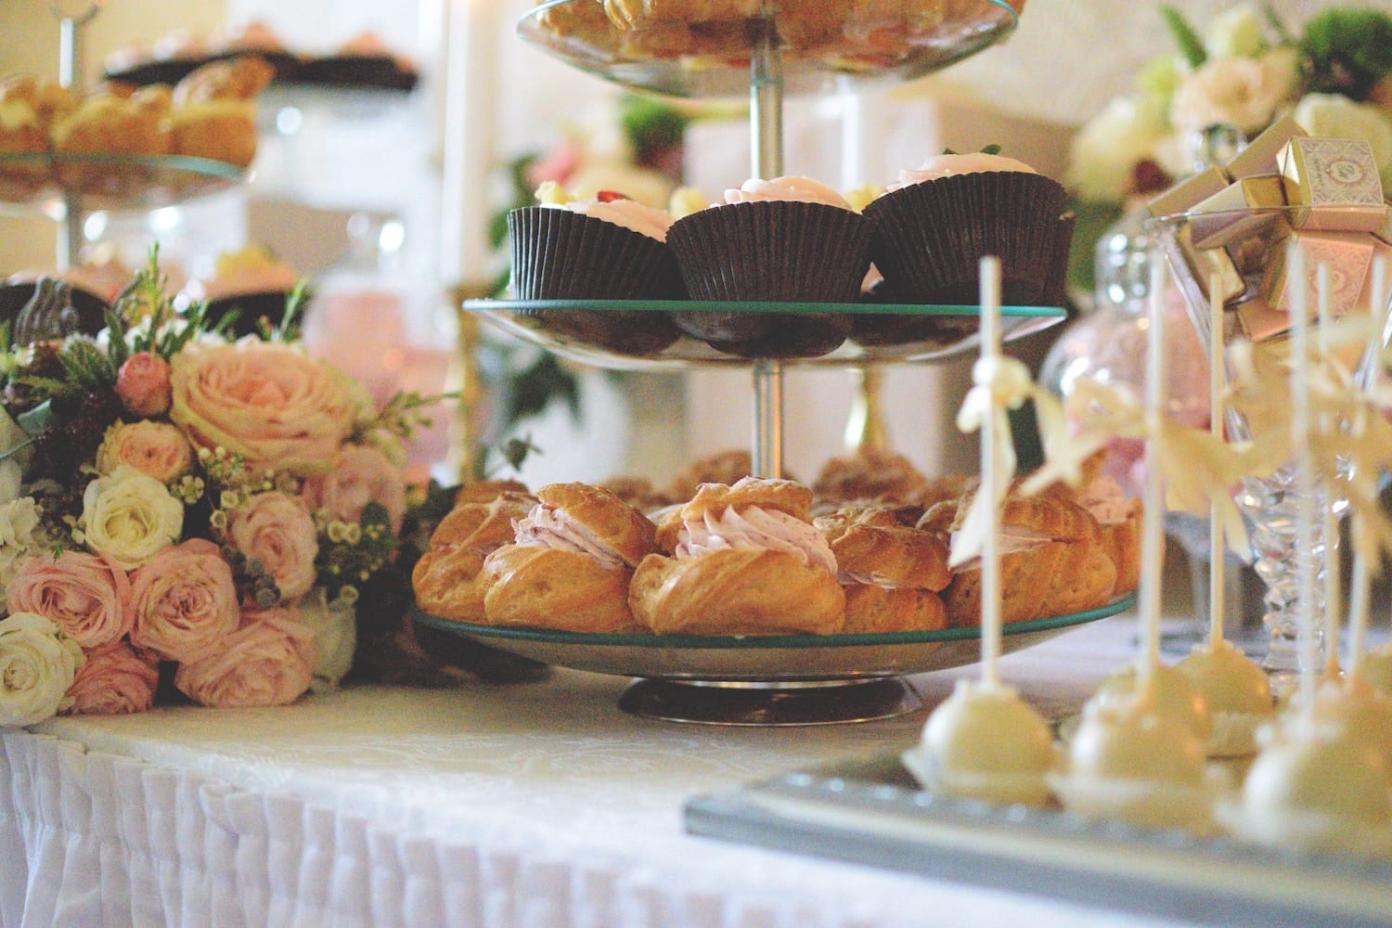 How Can I Select the Perfect Wedding Caterer for My Special Day?